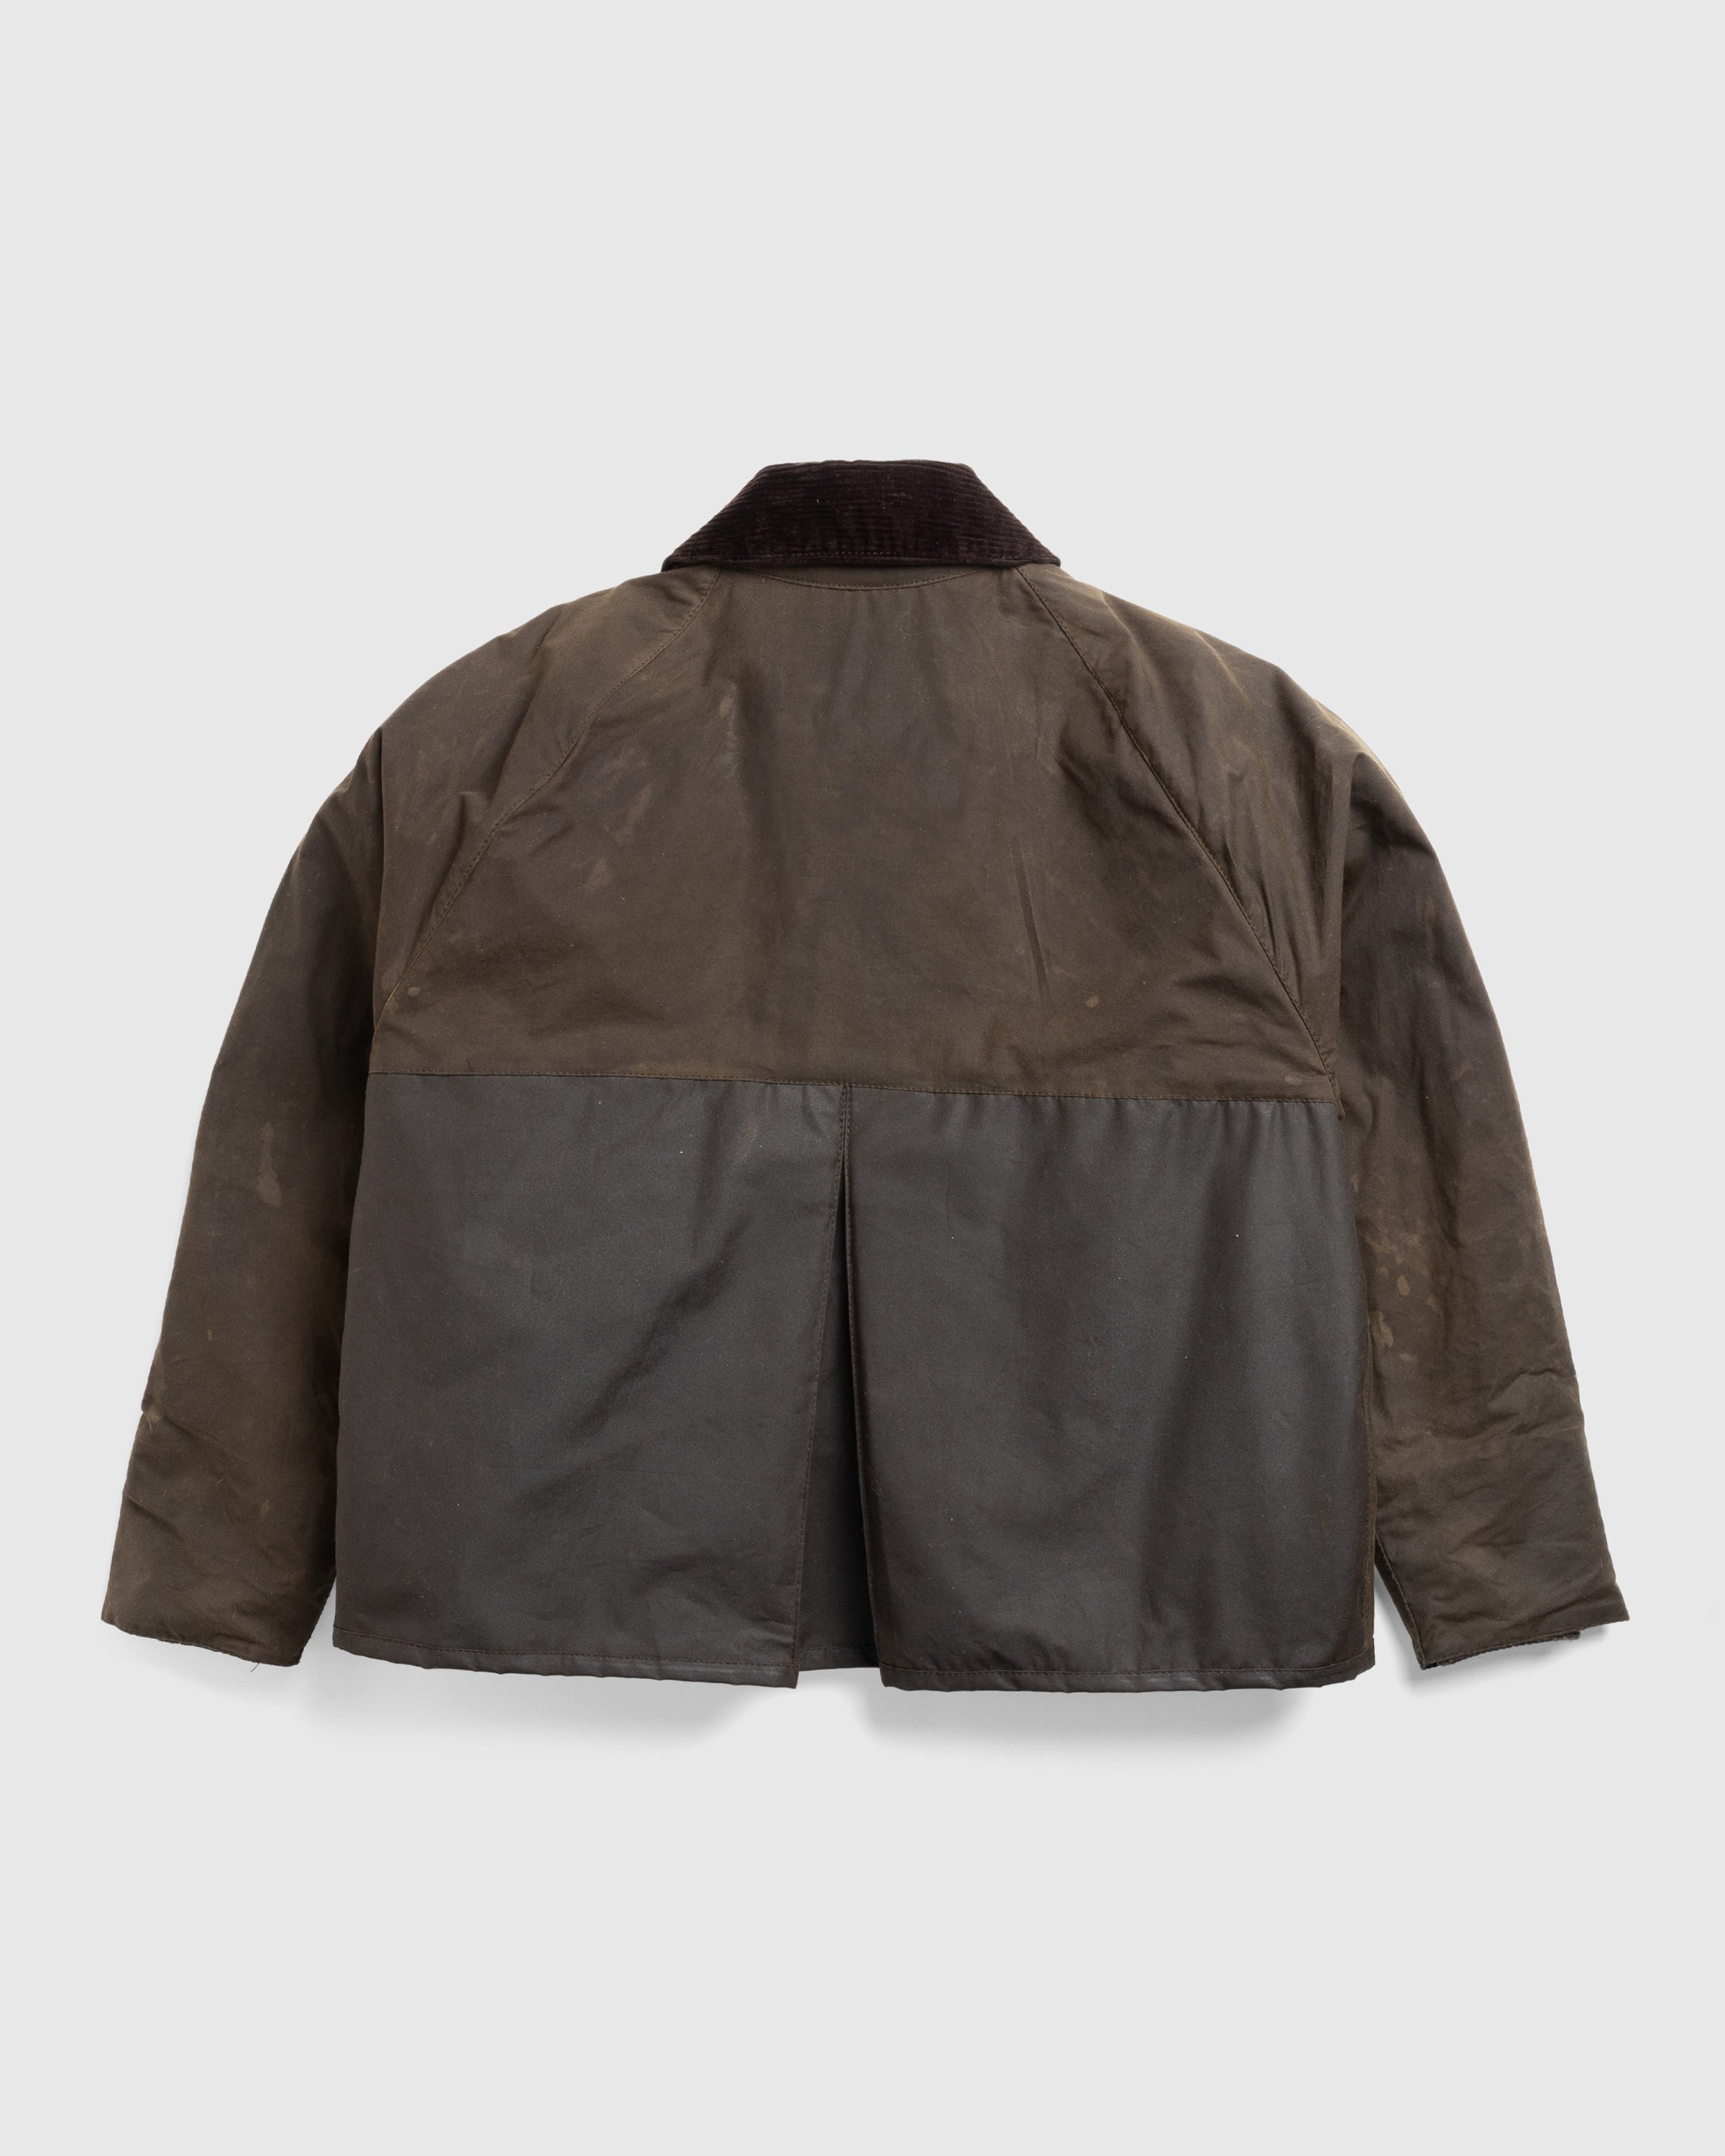 Barbour x Highsnobiety - Re-Loved Cropped Bedale Jacket 1 - 42 - Dark-Green - Clothing - Olive - Image 2